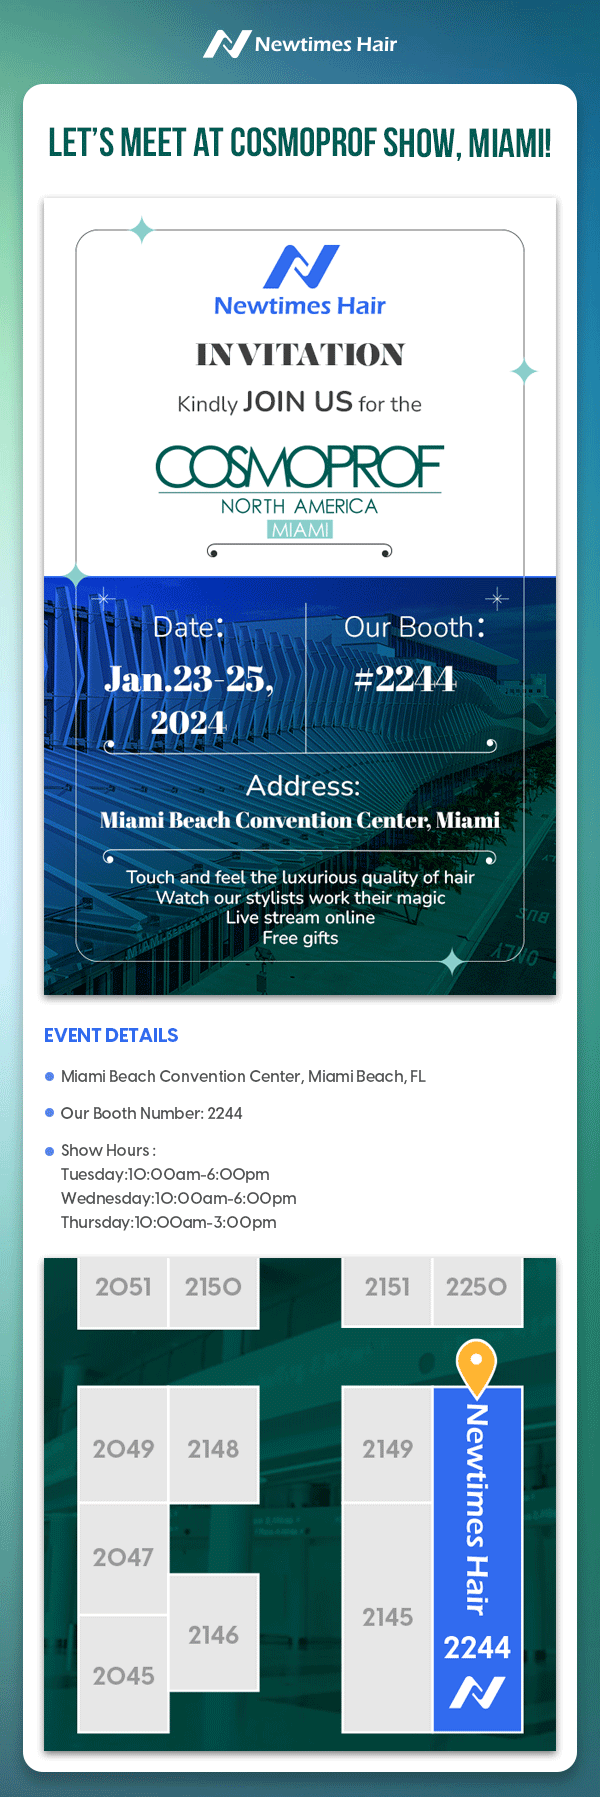 new times hair invitation to join us for the cosmoprof miami 2024